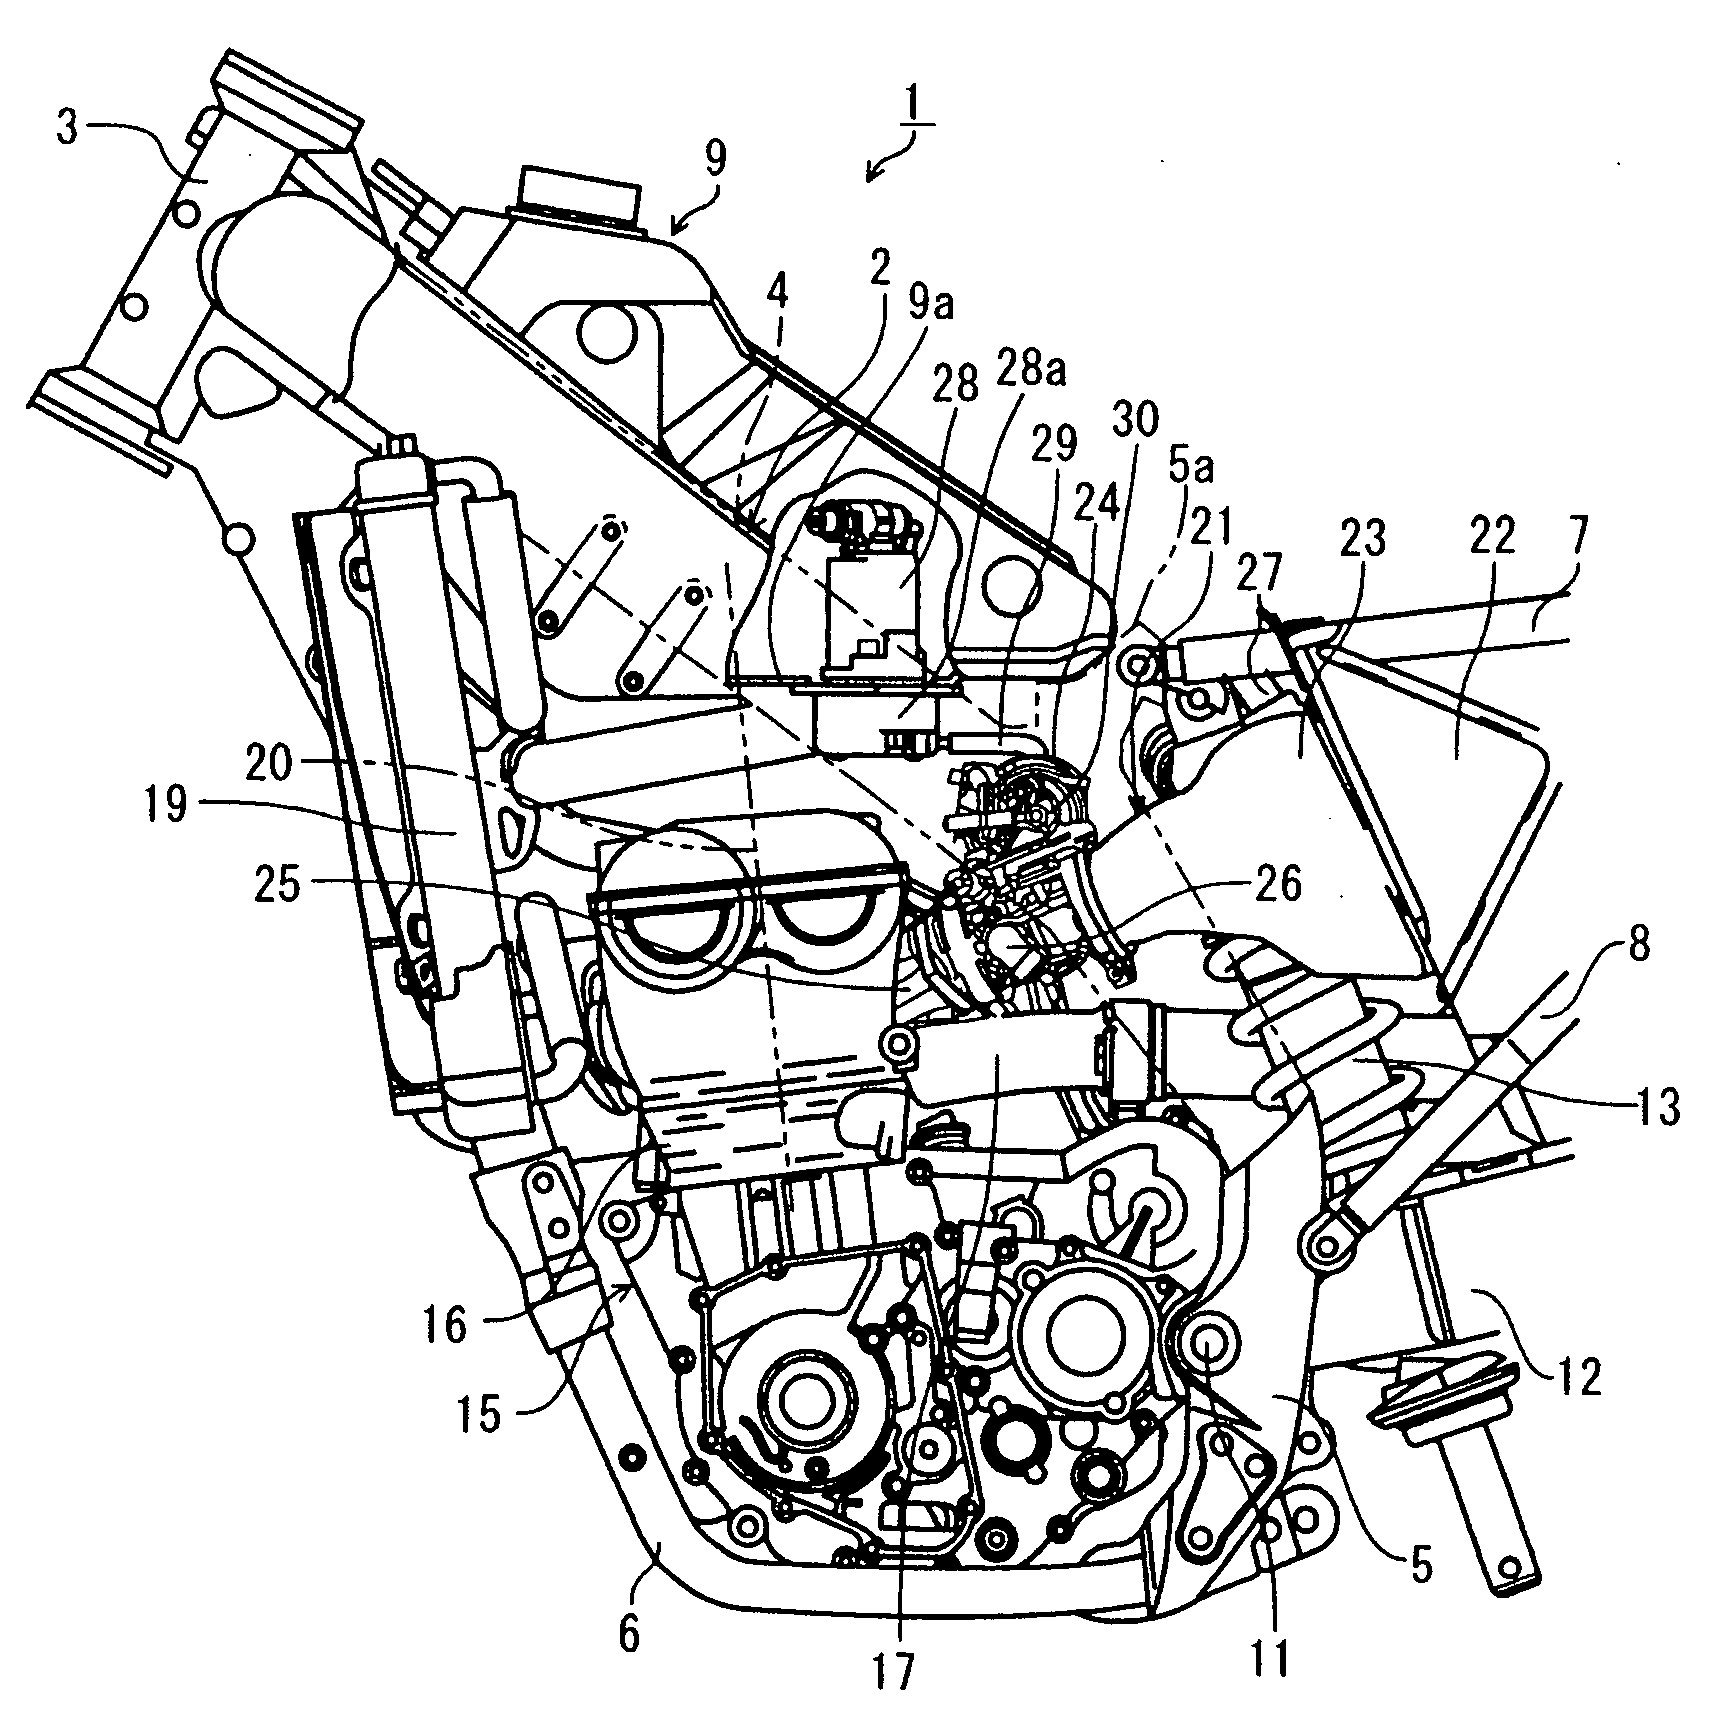 Fuel supply device of motorcycle